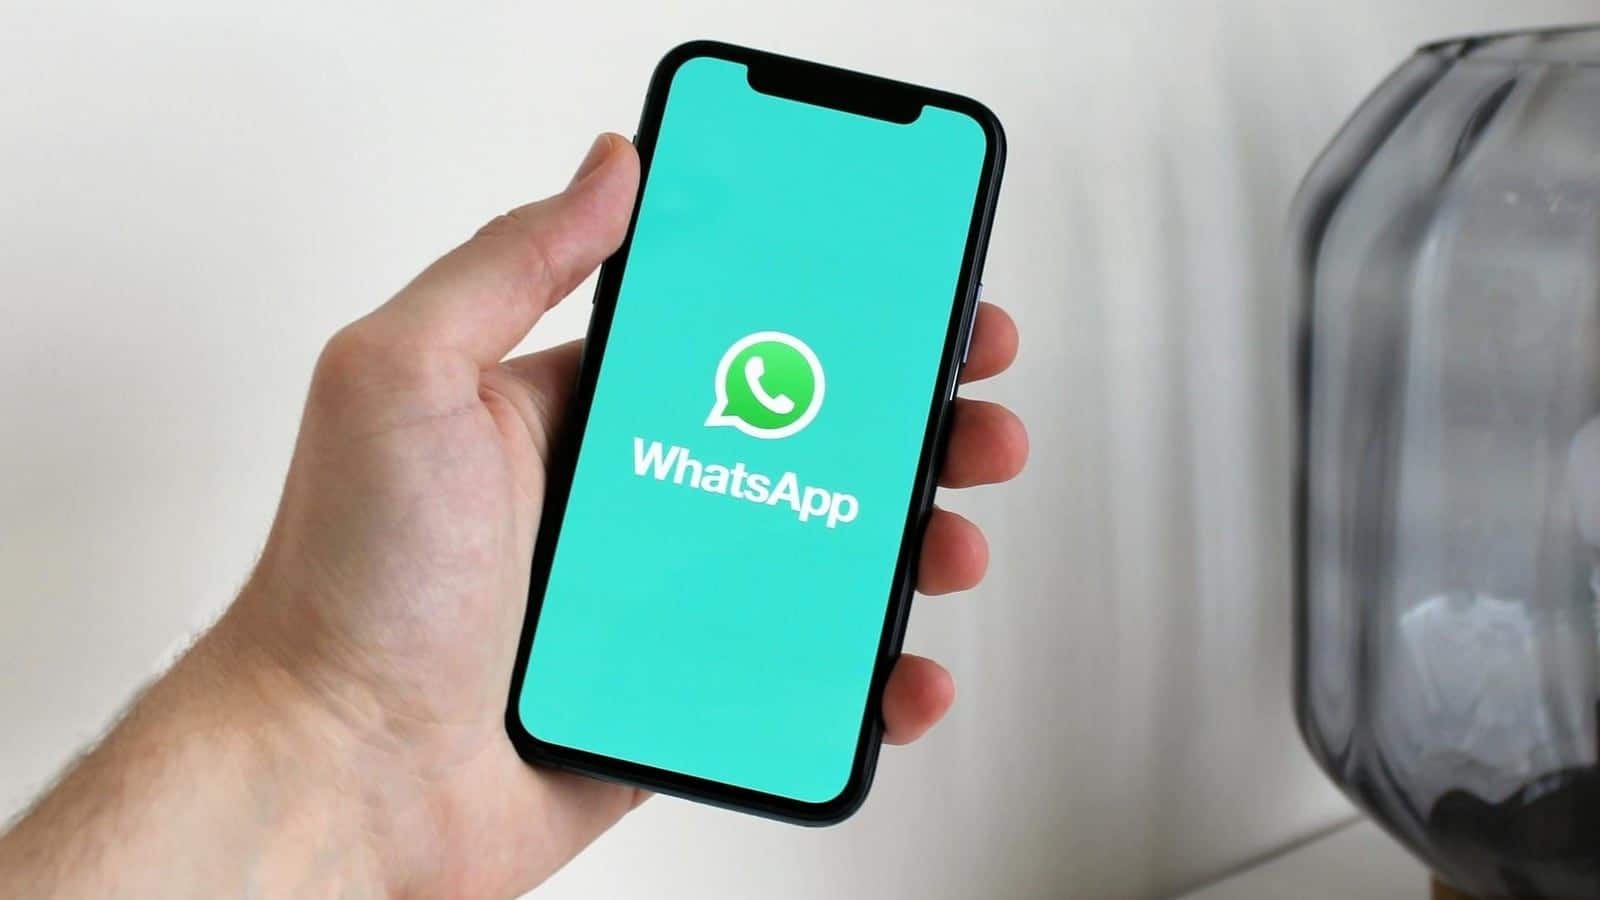 How to use WhatsApp's privacy check feature on iOS, Android